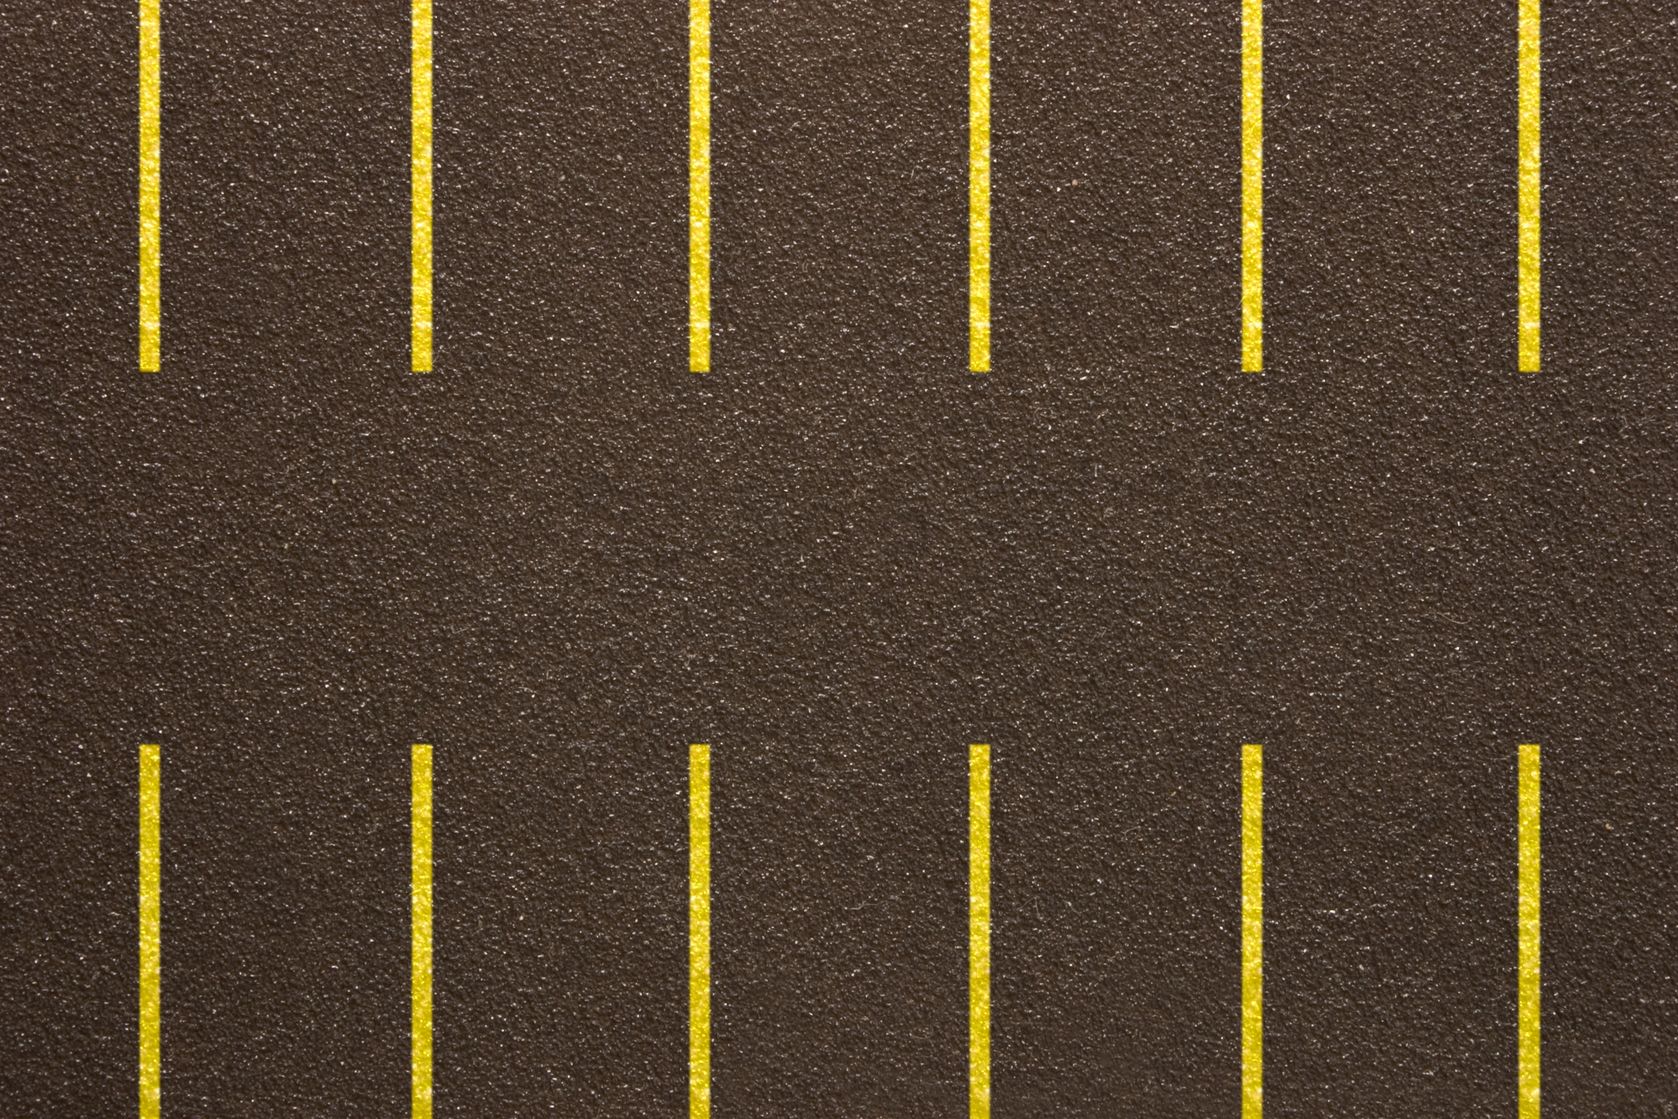 Parking Lot with yellow lines